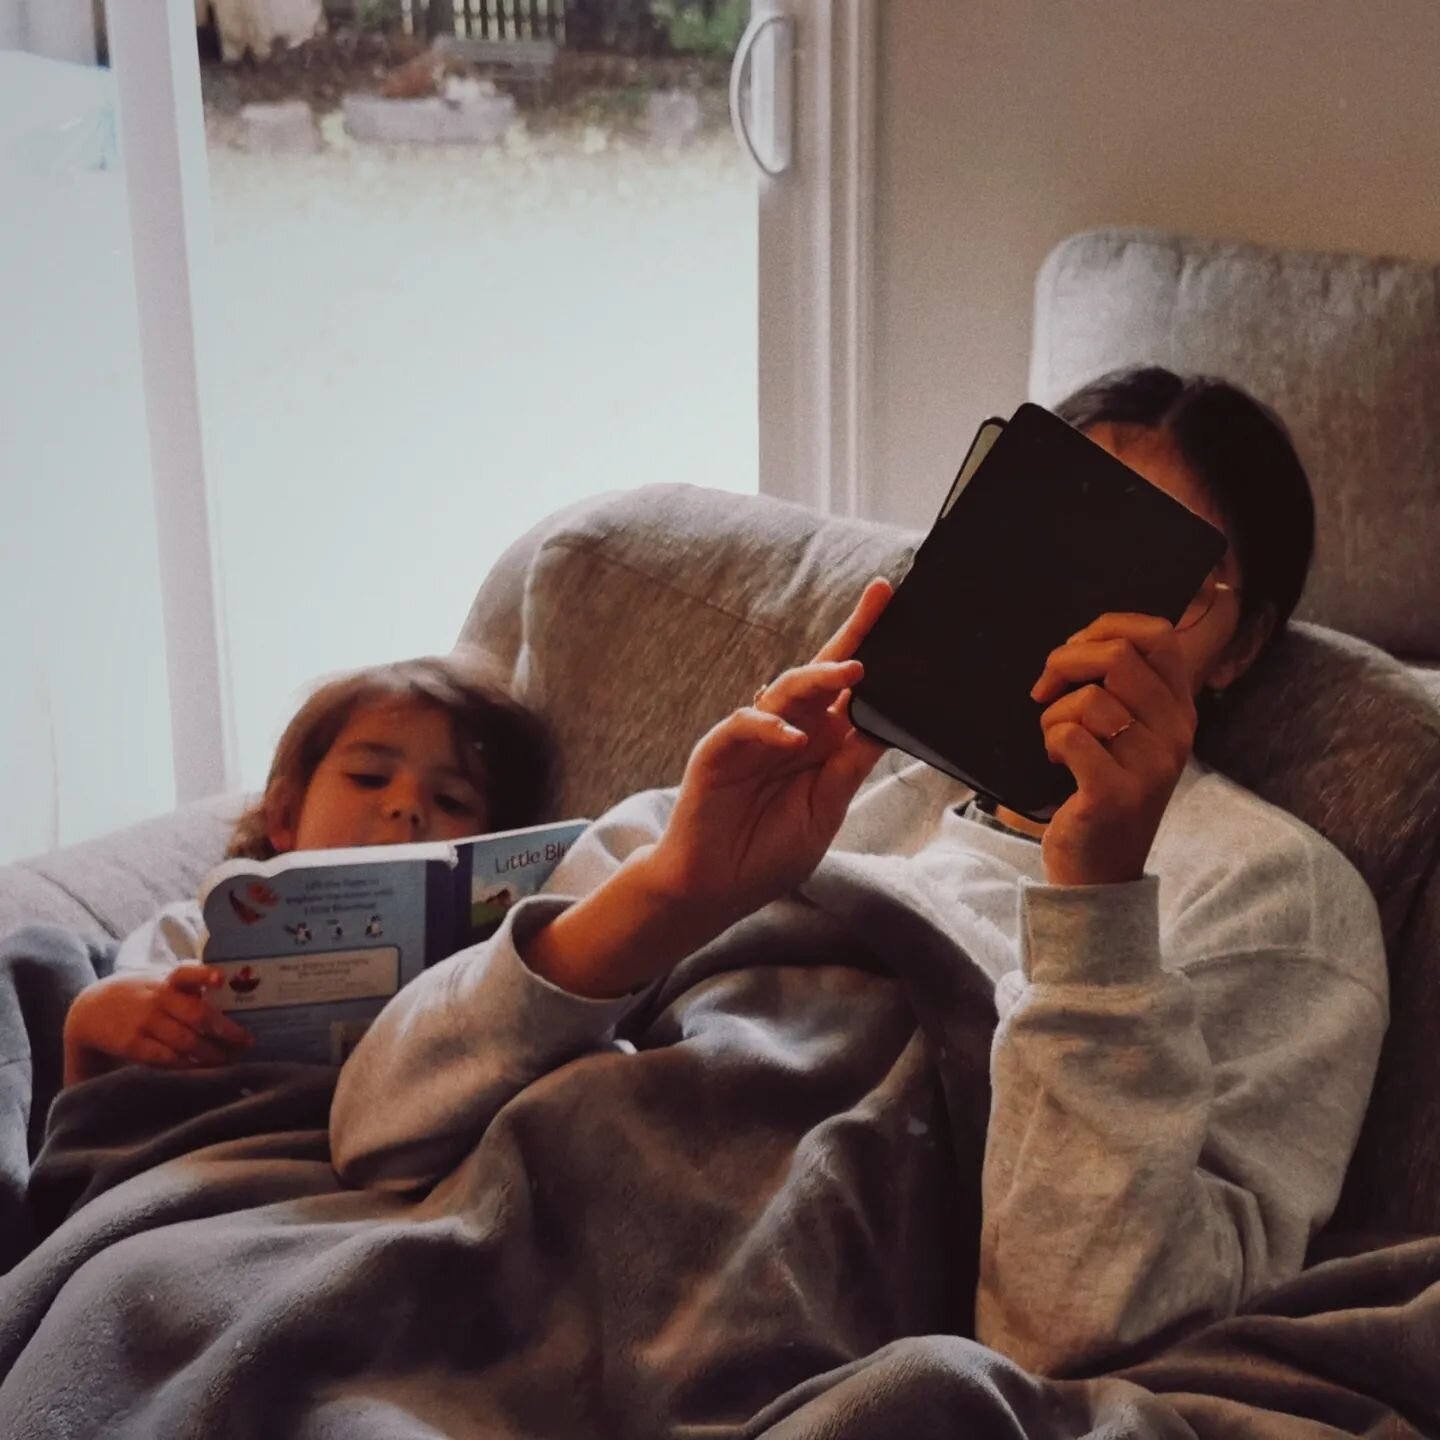 Sisters reading...
☆
☆
☆
☆
☆
☆
☆
#sisters #littlesis #bigsis #sister #bookworm #youngreaders #book #books #bookstagram #bookworm #booklover #bookish #booknerd #bookaddict #bookme